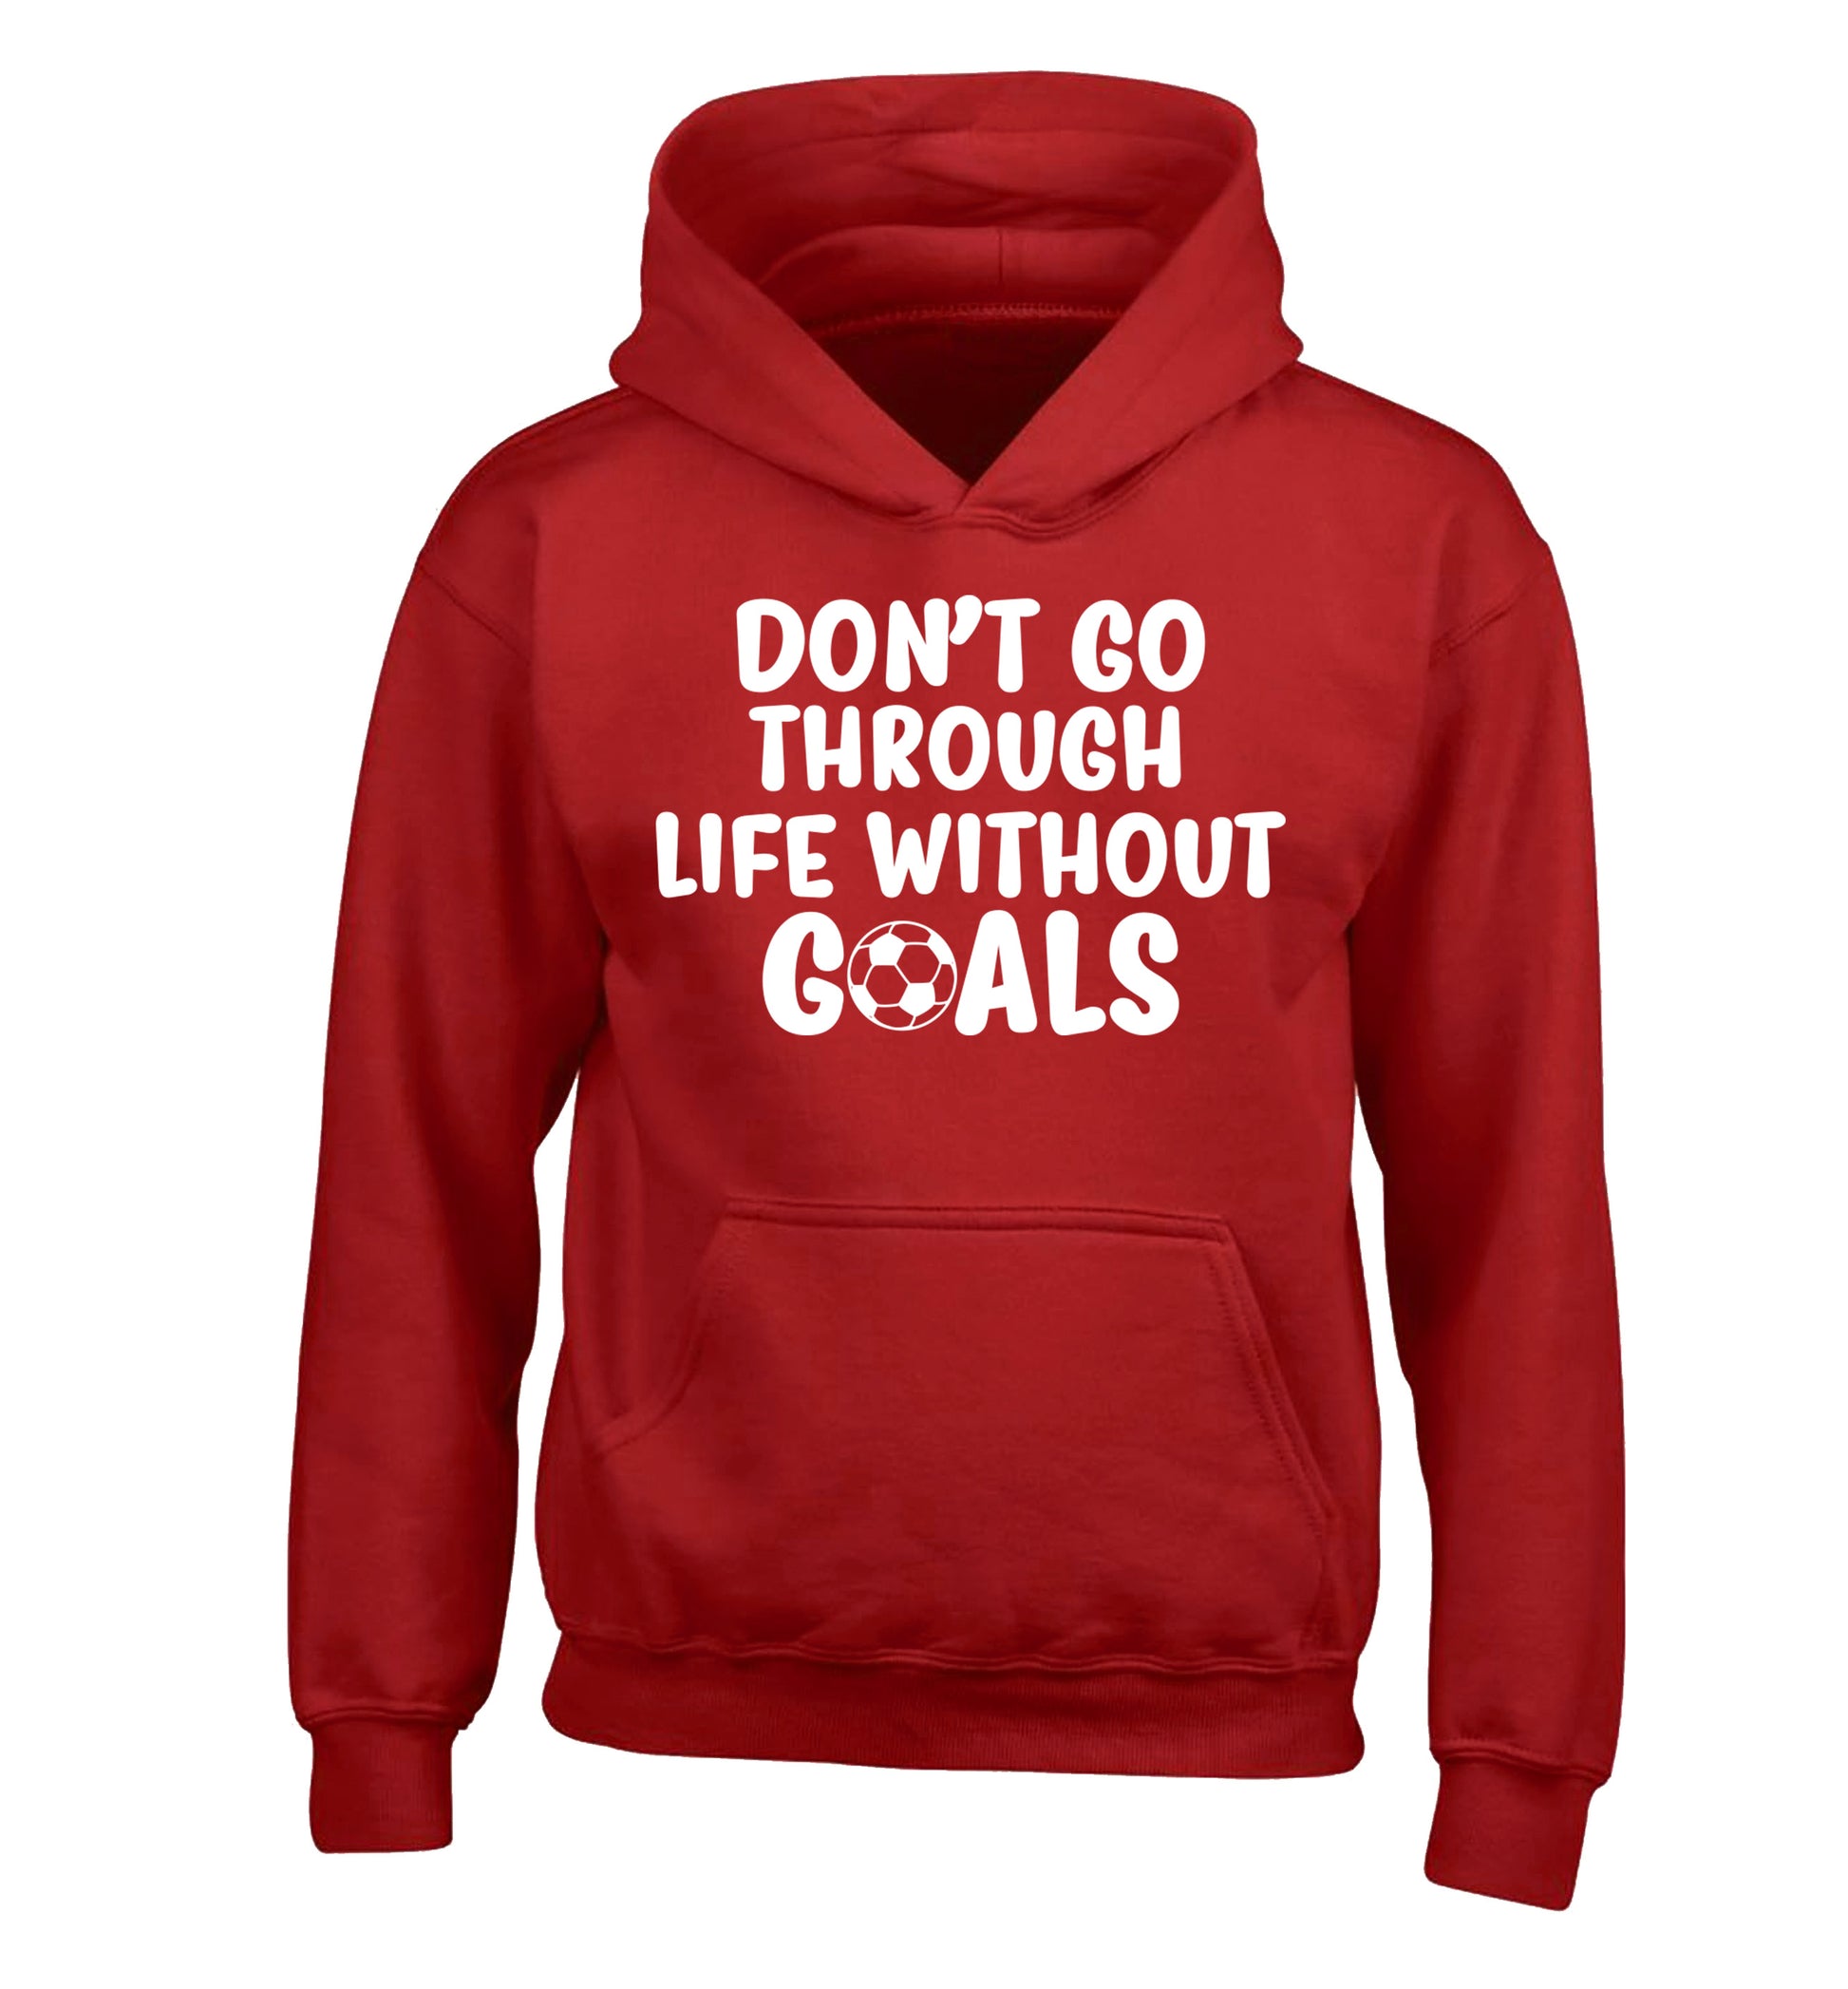 Don't go through life without goals children's red hoodie 12-14 Years